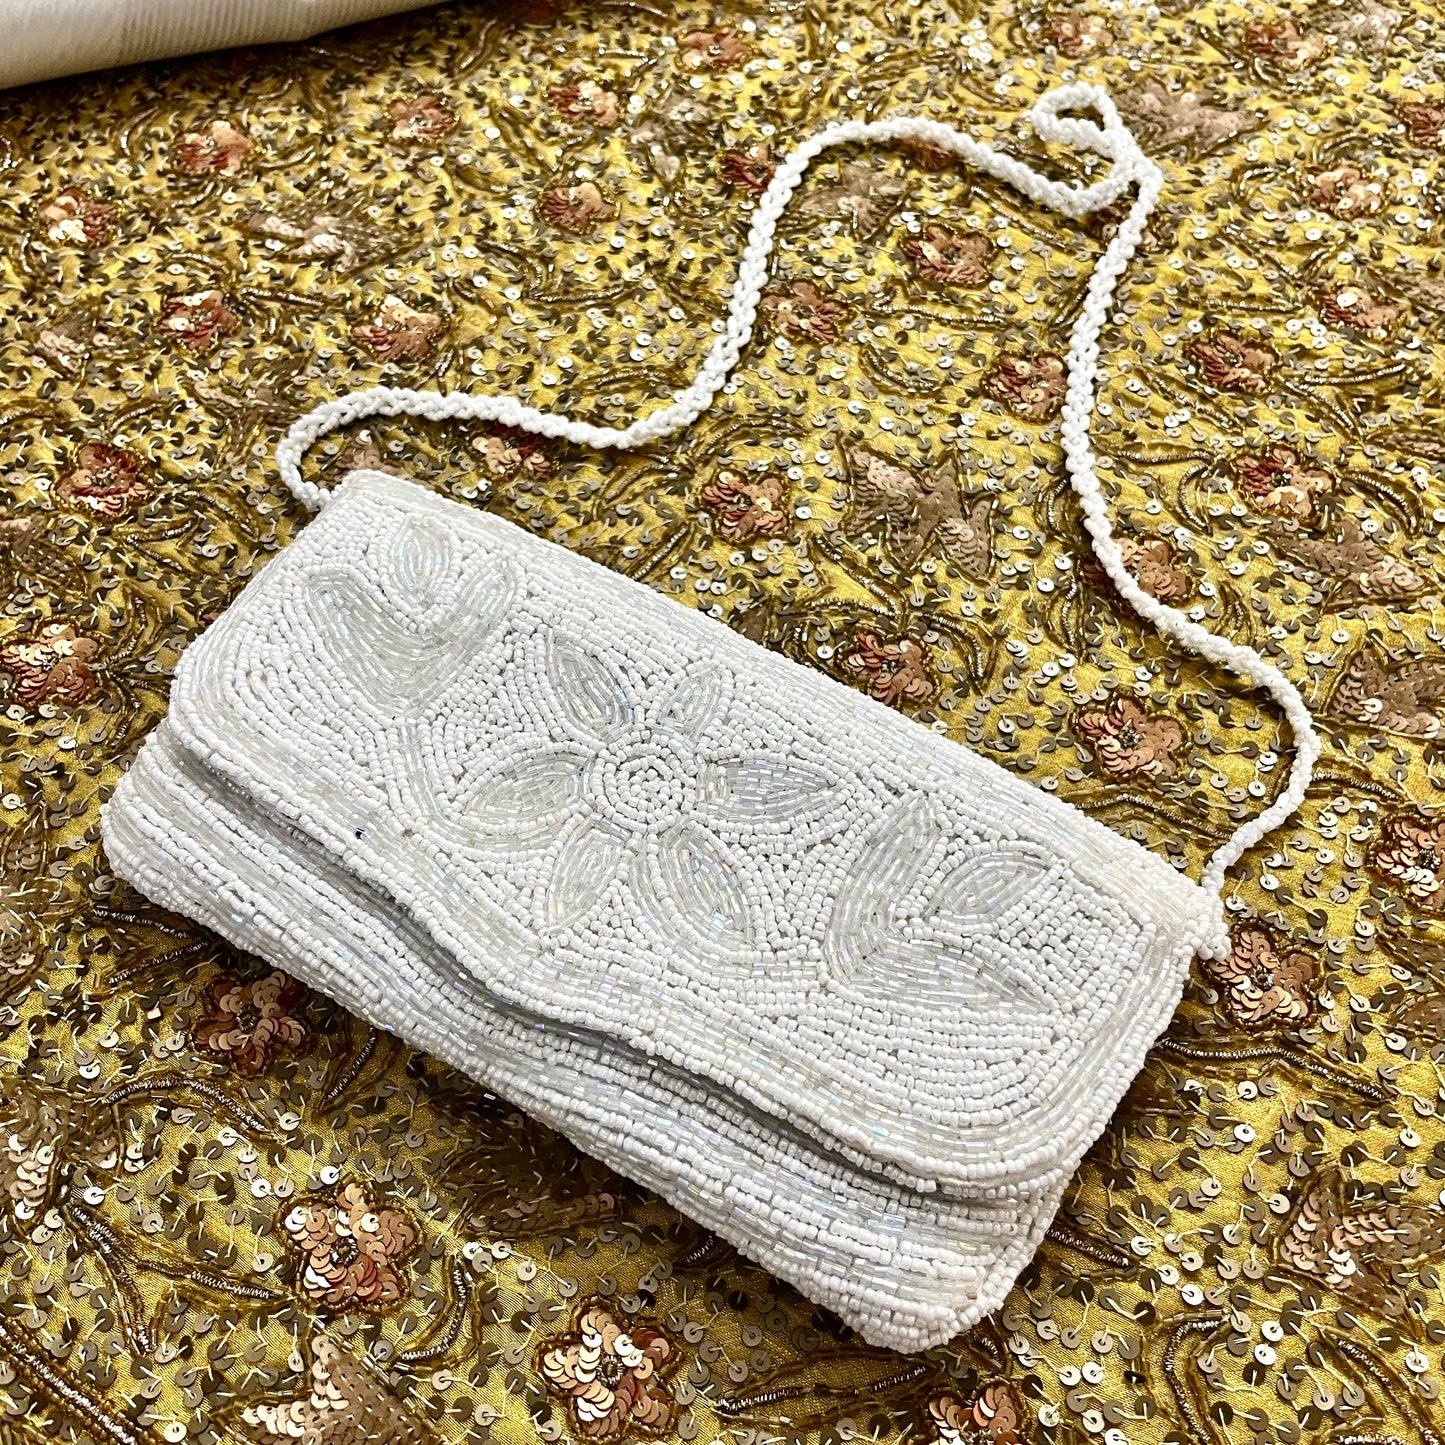 White pearl embellished purse